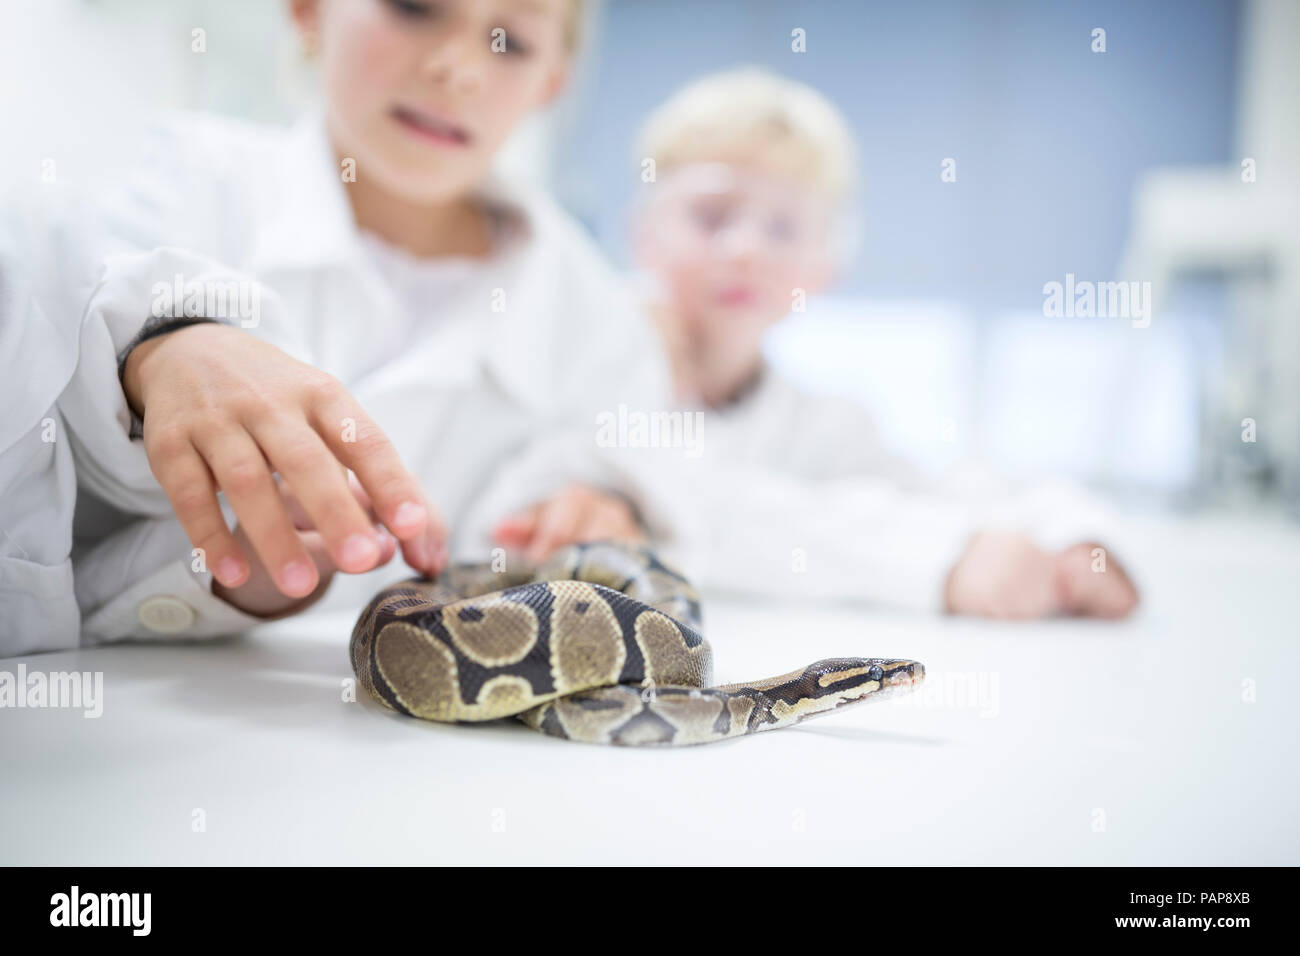 Pupils in science class examining snake Stock Photo